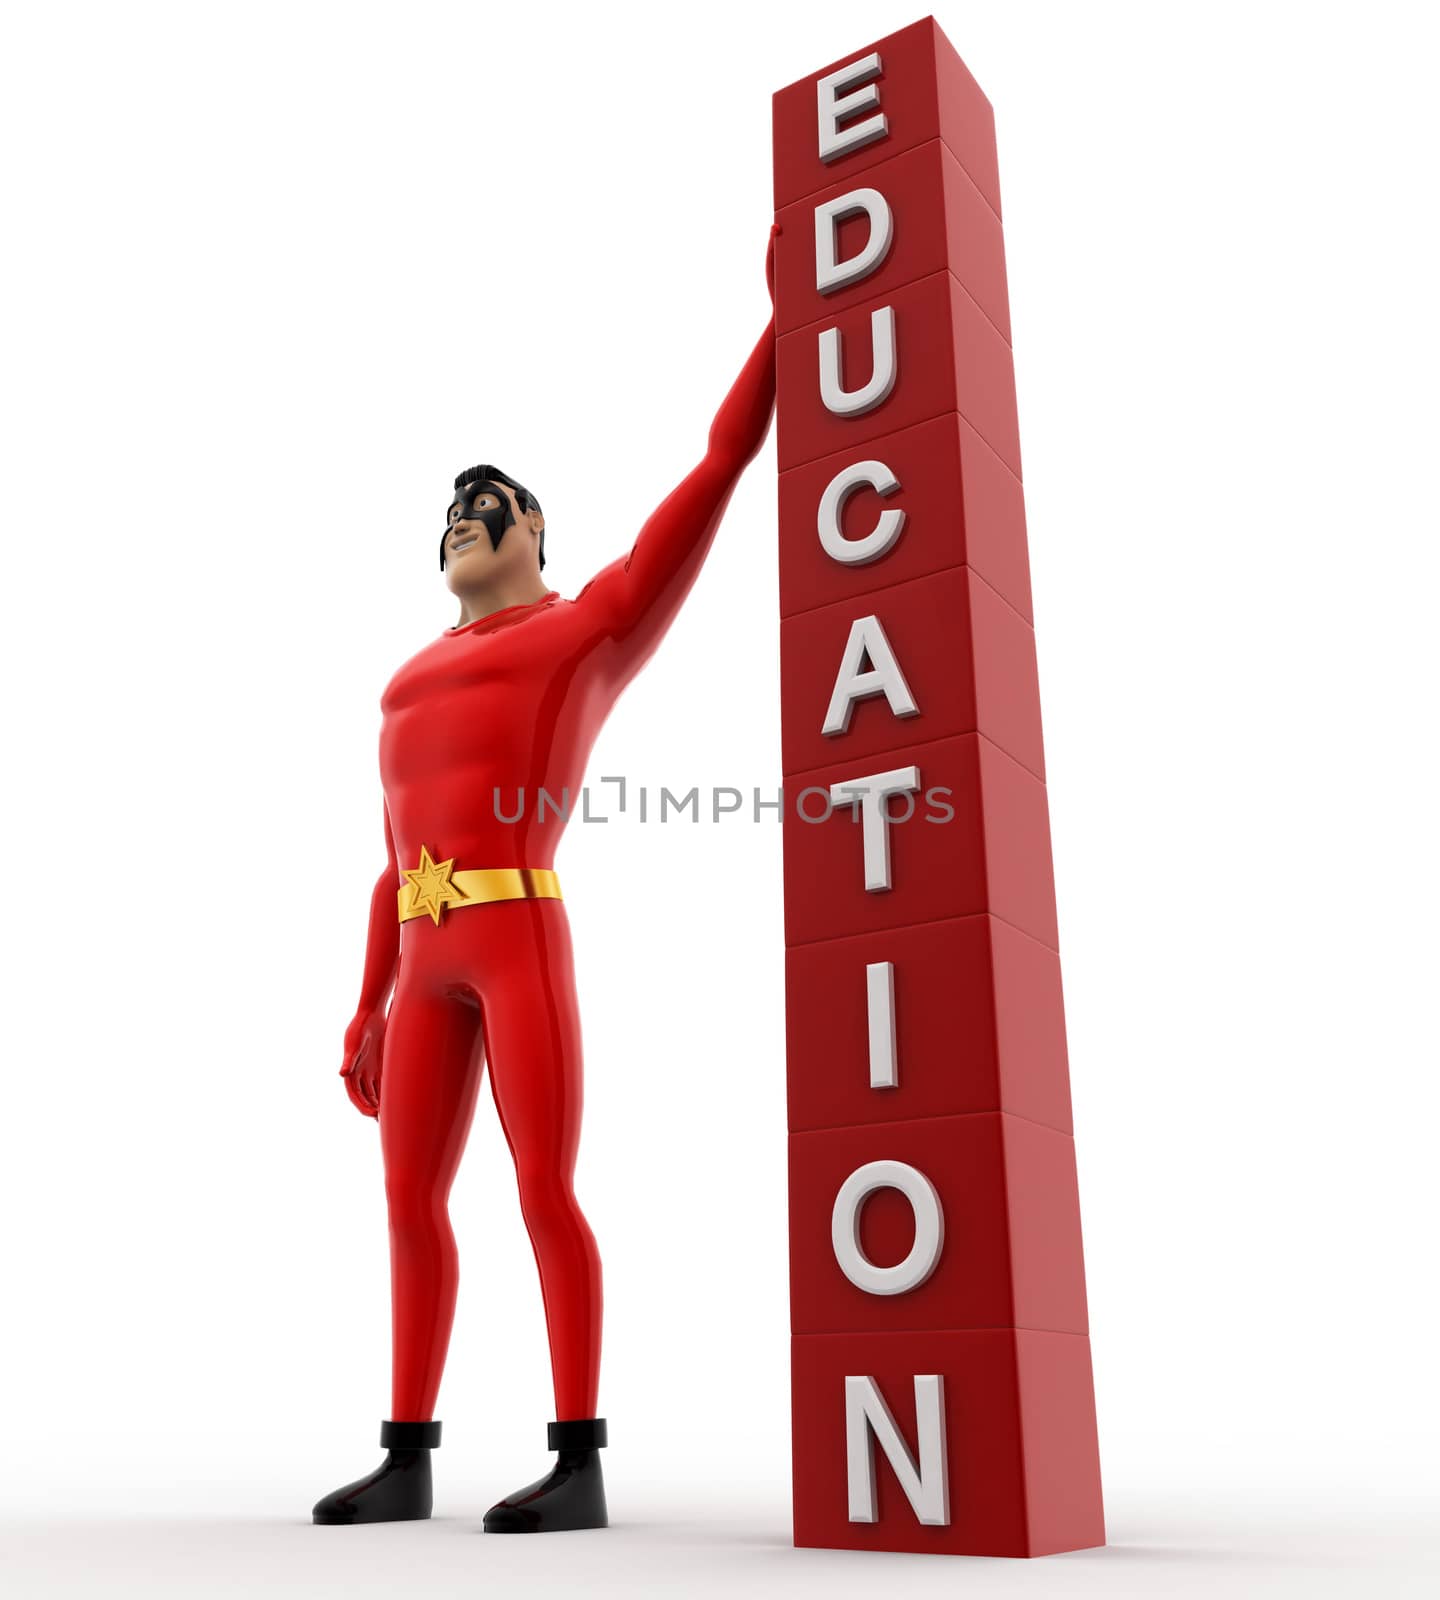 3d superhero with education cubes concept by touchmenithin@gmail.com